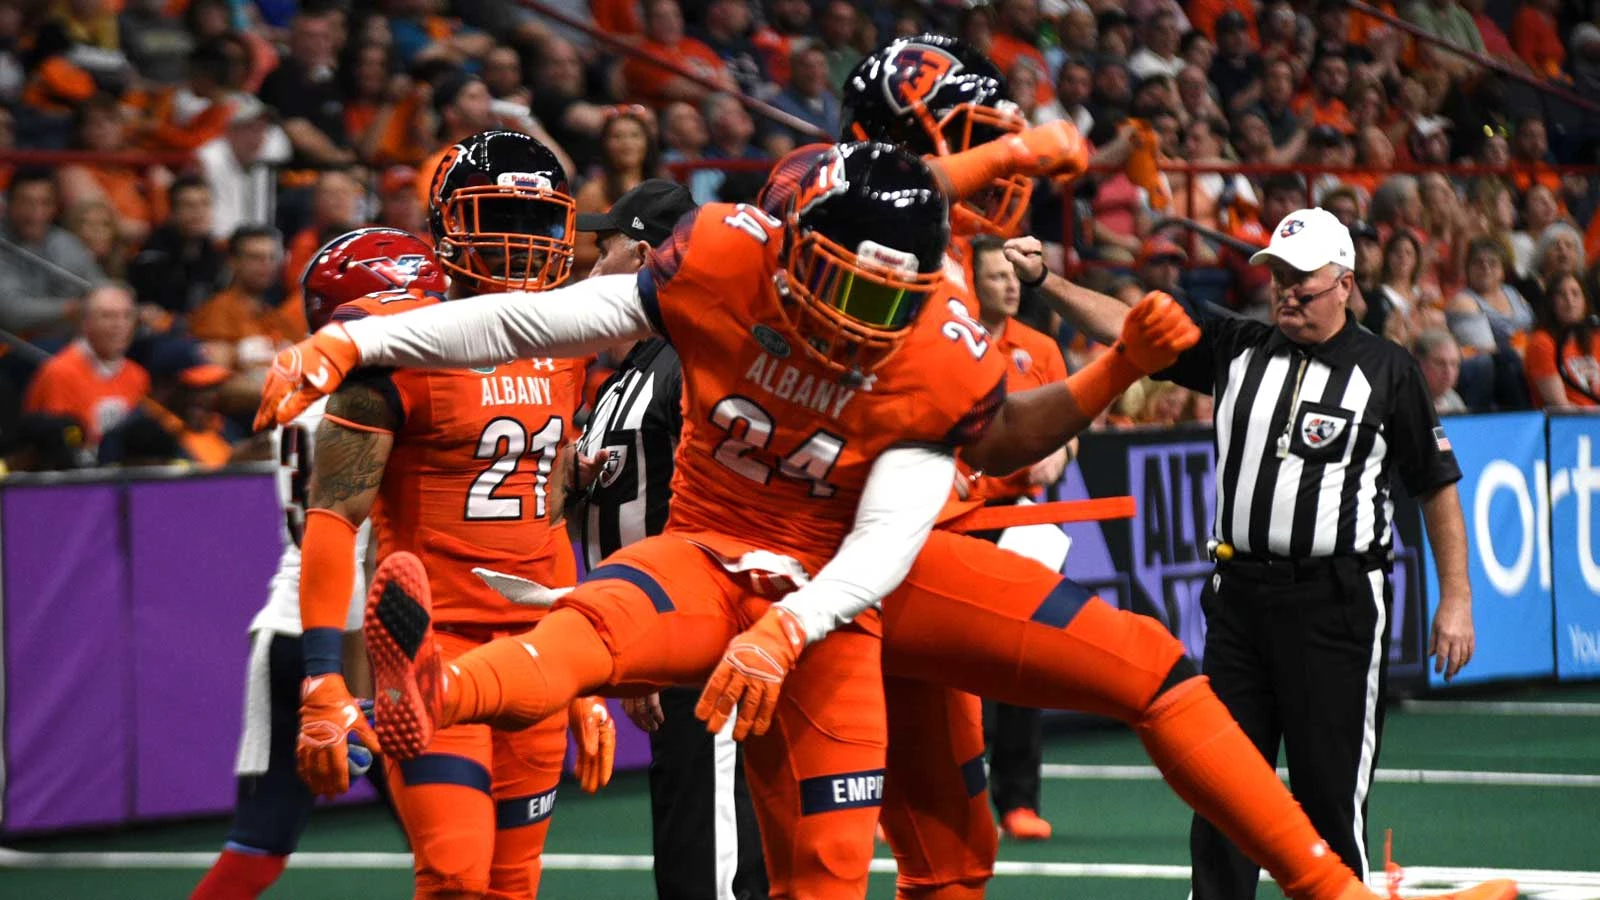 The Albany Empire Have Clinched The Top Seed In The AFL Playoffs